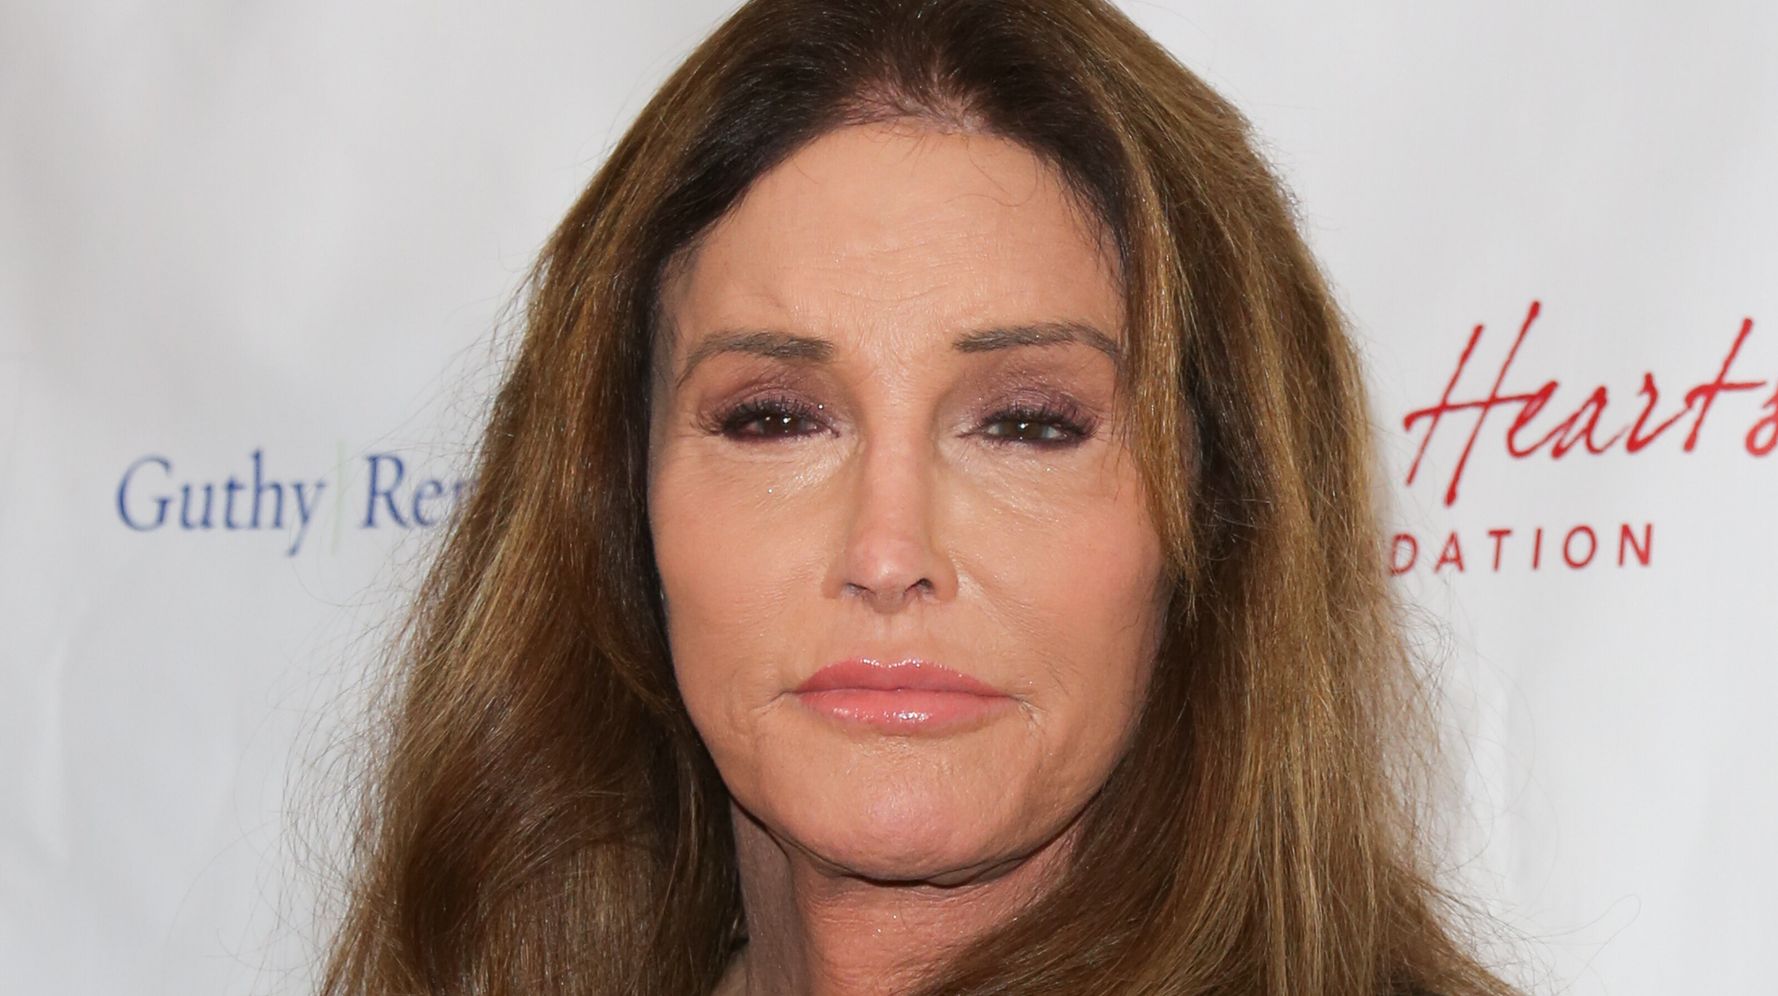 LGBT Activists Not Excited By Caitlyn Jenner’s Run For California Governor